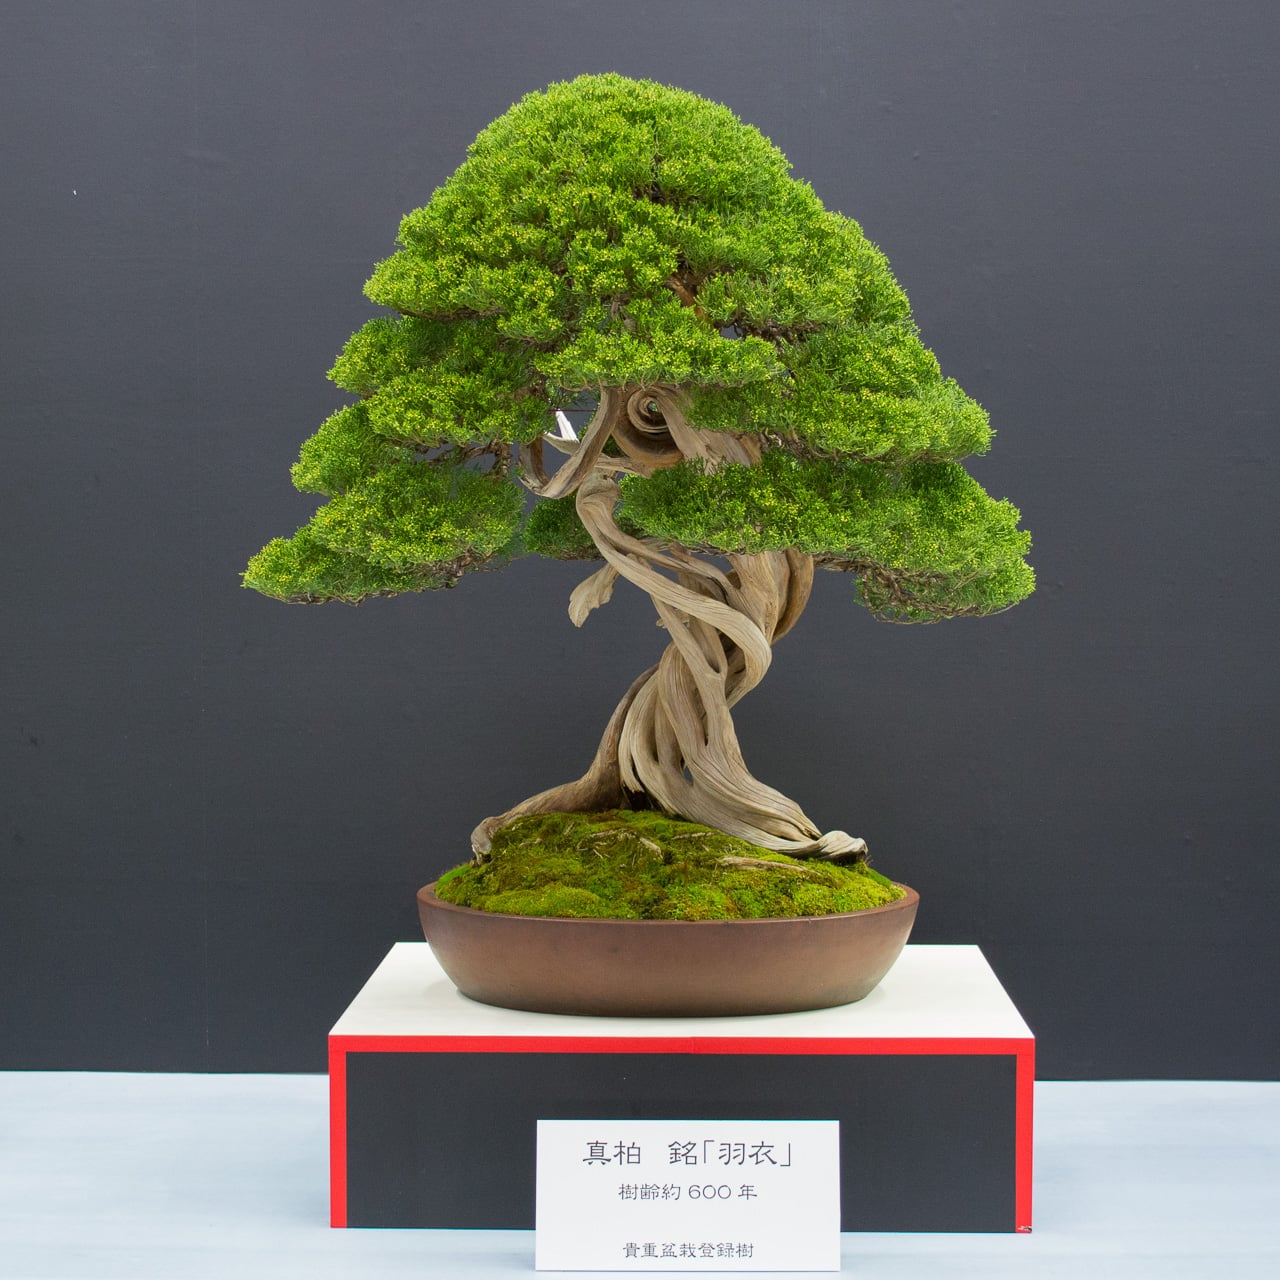 Bonsai from the Keiunan Collection at the World Bonsai Convention